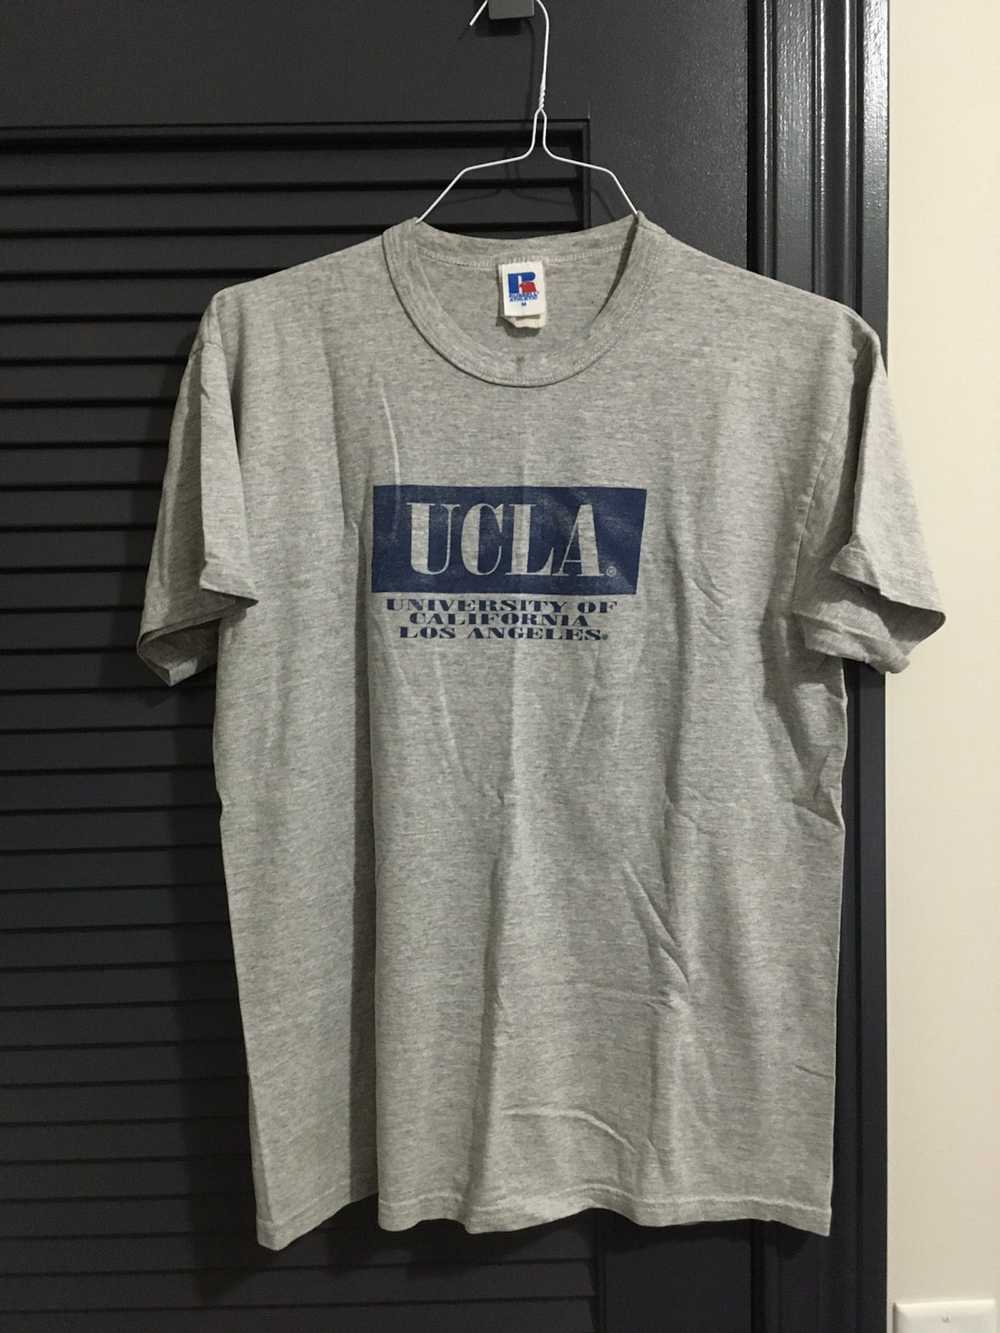 Ncaa × Russell Athletic Vintage 90s UCLA T-shirt - image 1